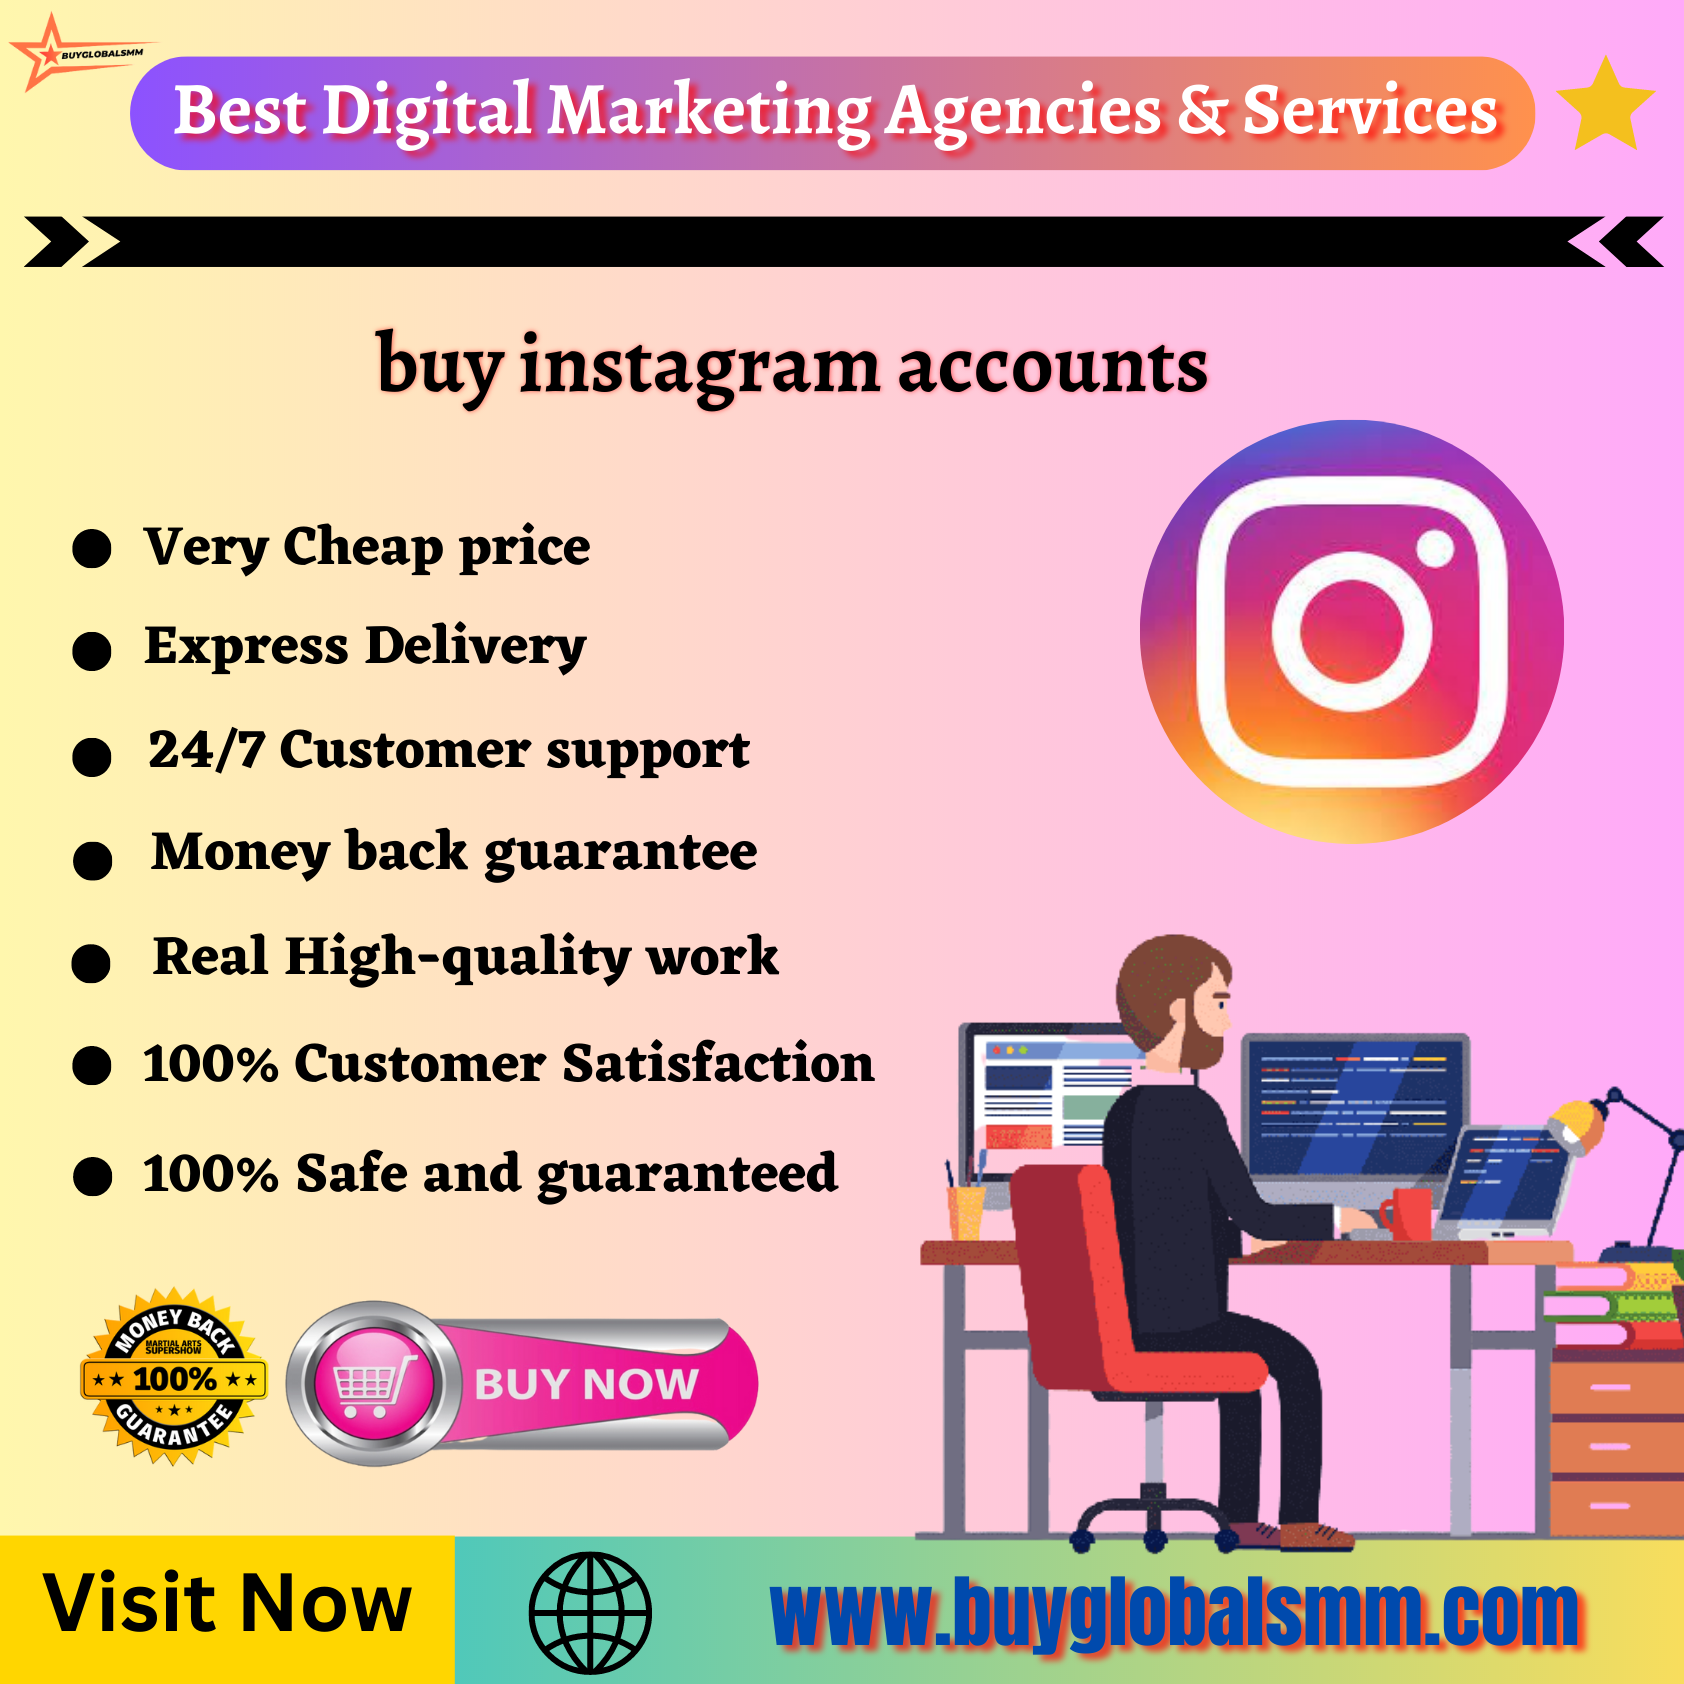 buy instagram accounts-100% best service, and cheap...